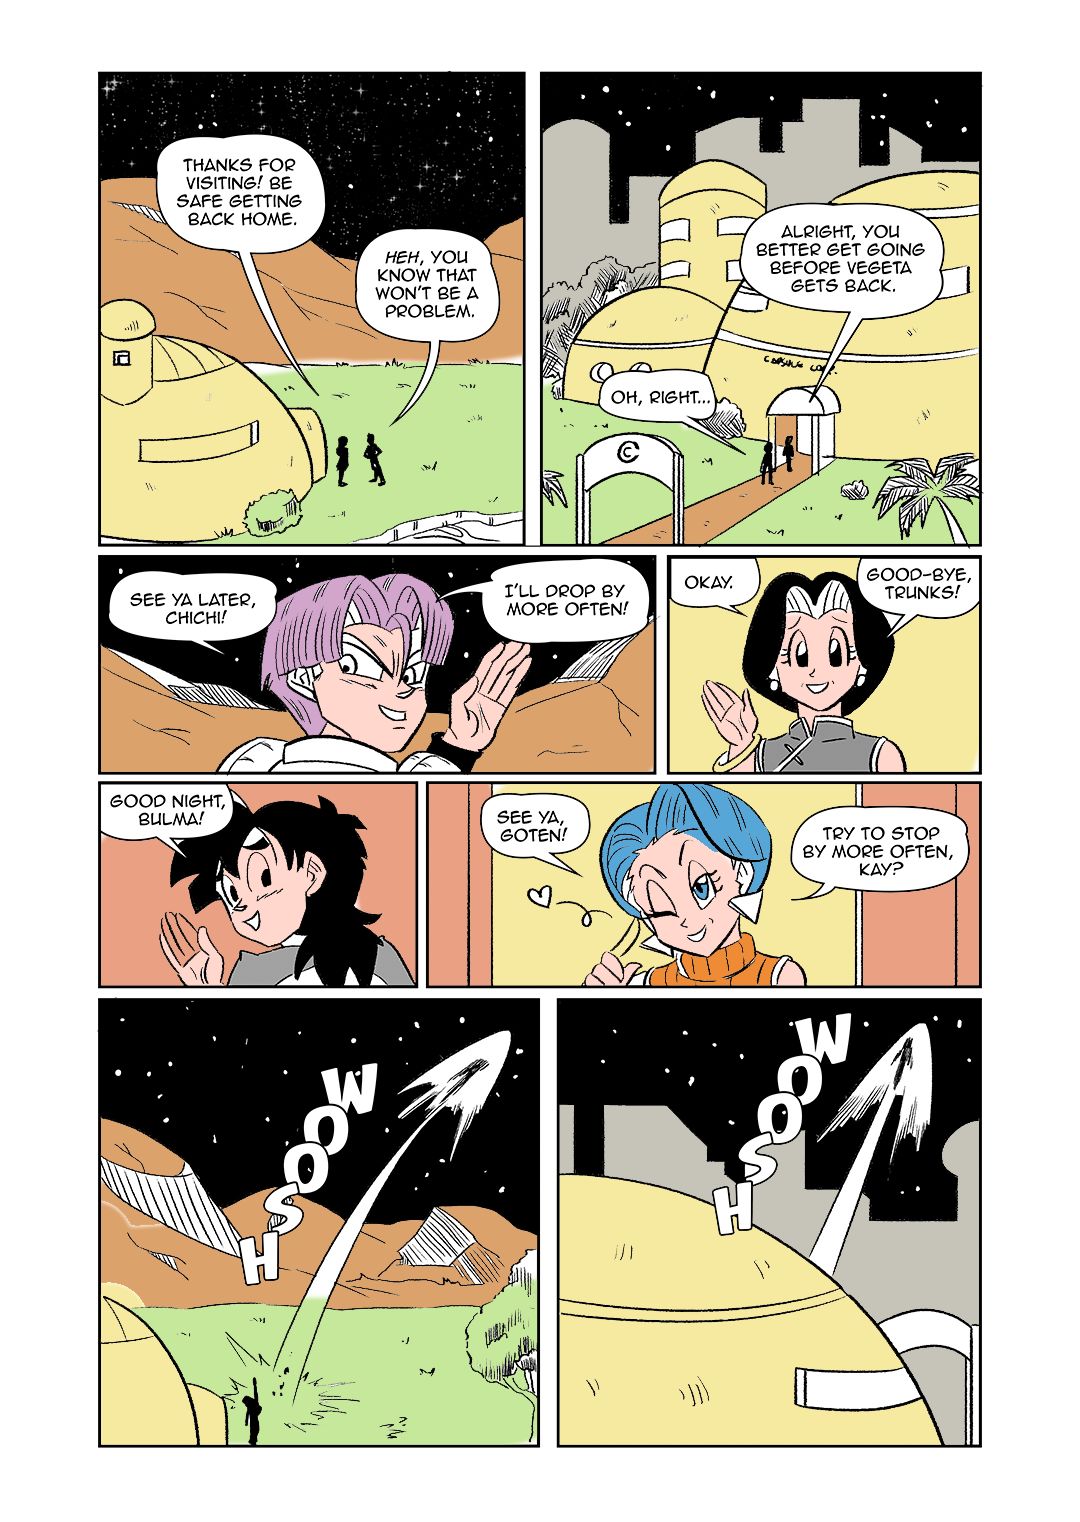 The Switch Up (Dragon Ball Z) by Funsexydb page 25